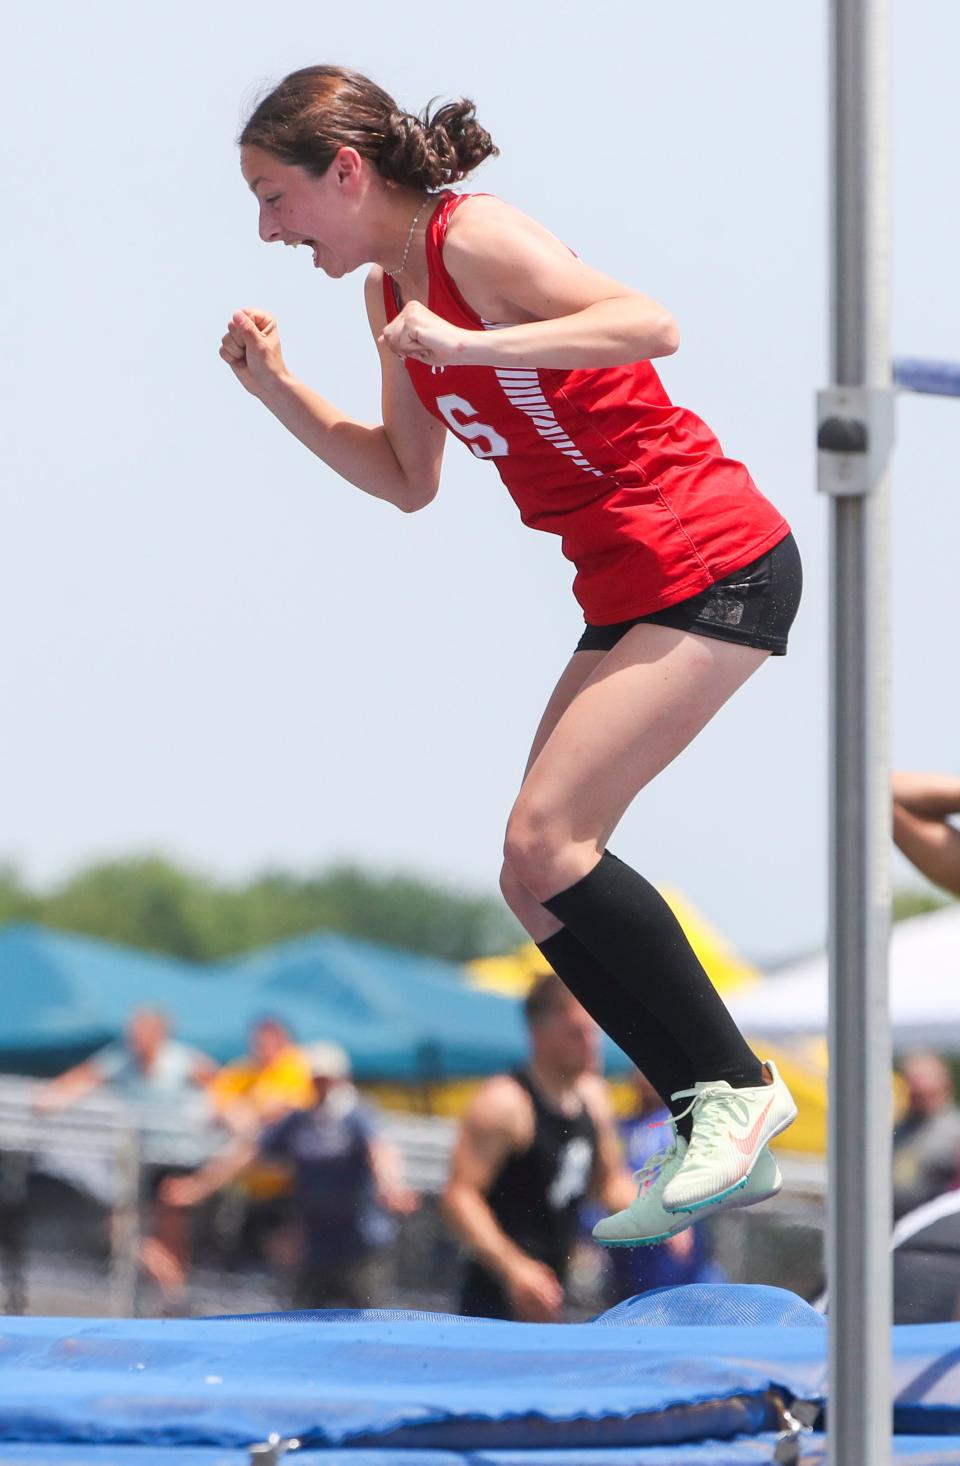 Smyrna's Brooke Duke reacts after clearing 5' 6" on her first attempt at that height to win the Division I high jump during the DIAA state high school track and field championships Saturday, May 22, 2022 at Dover High School.